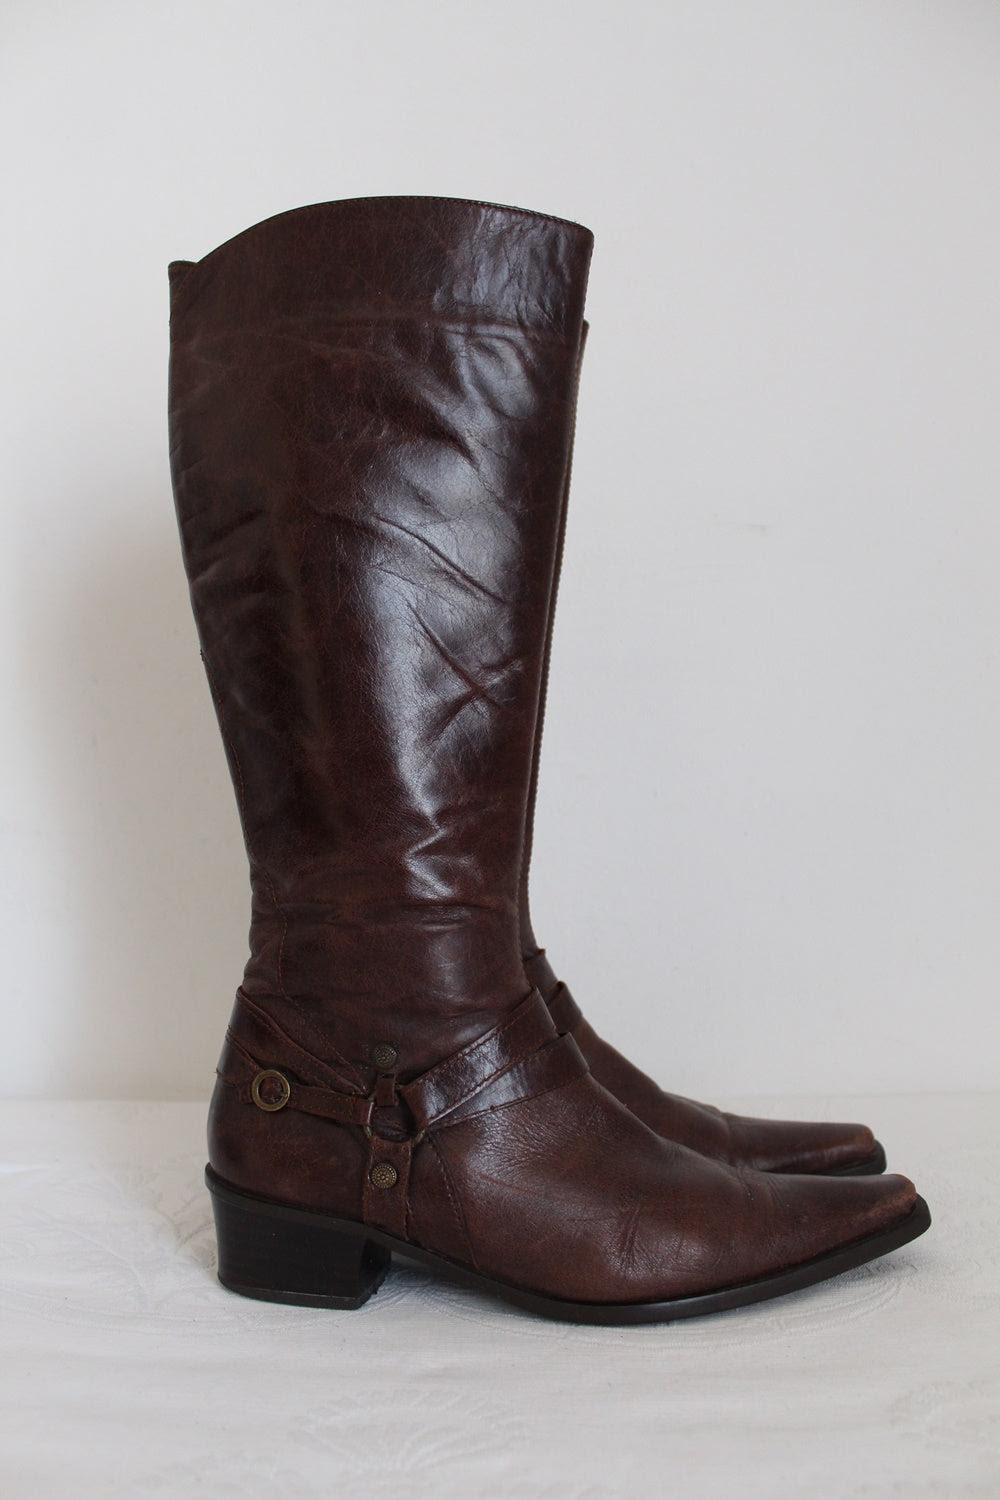 LAMICA GENUINE LEATHER POINTED TOE BOOTS BROWN - SIZE 7